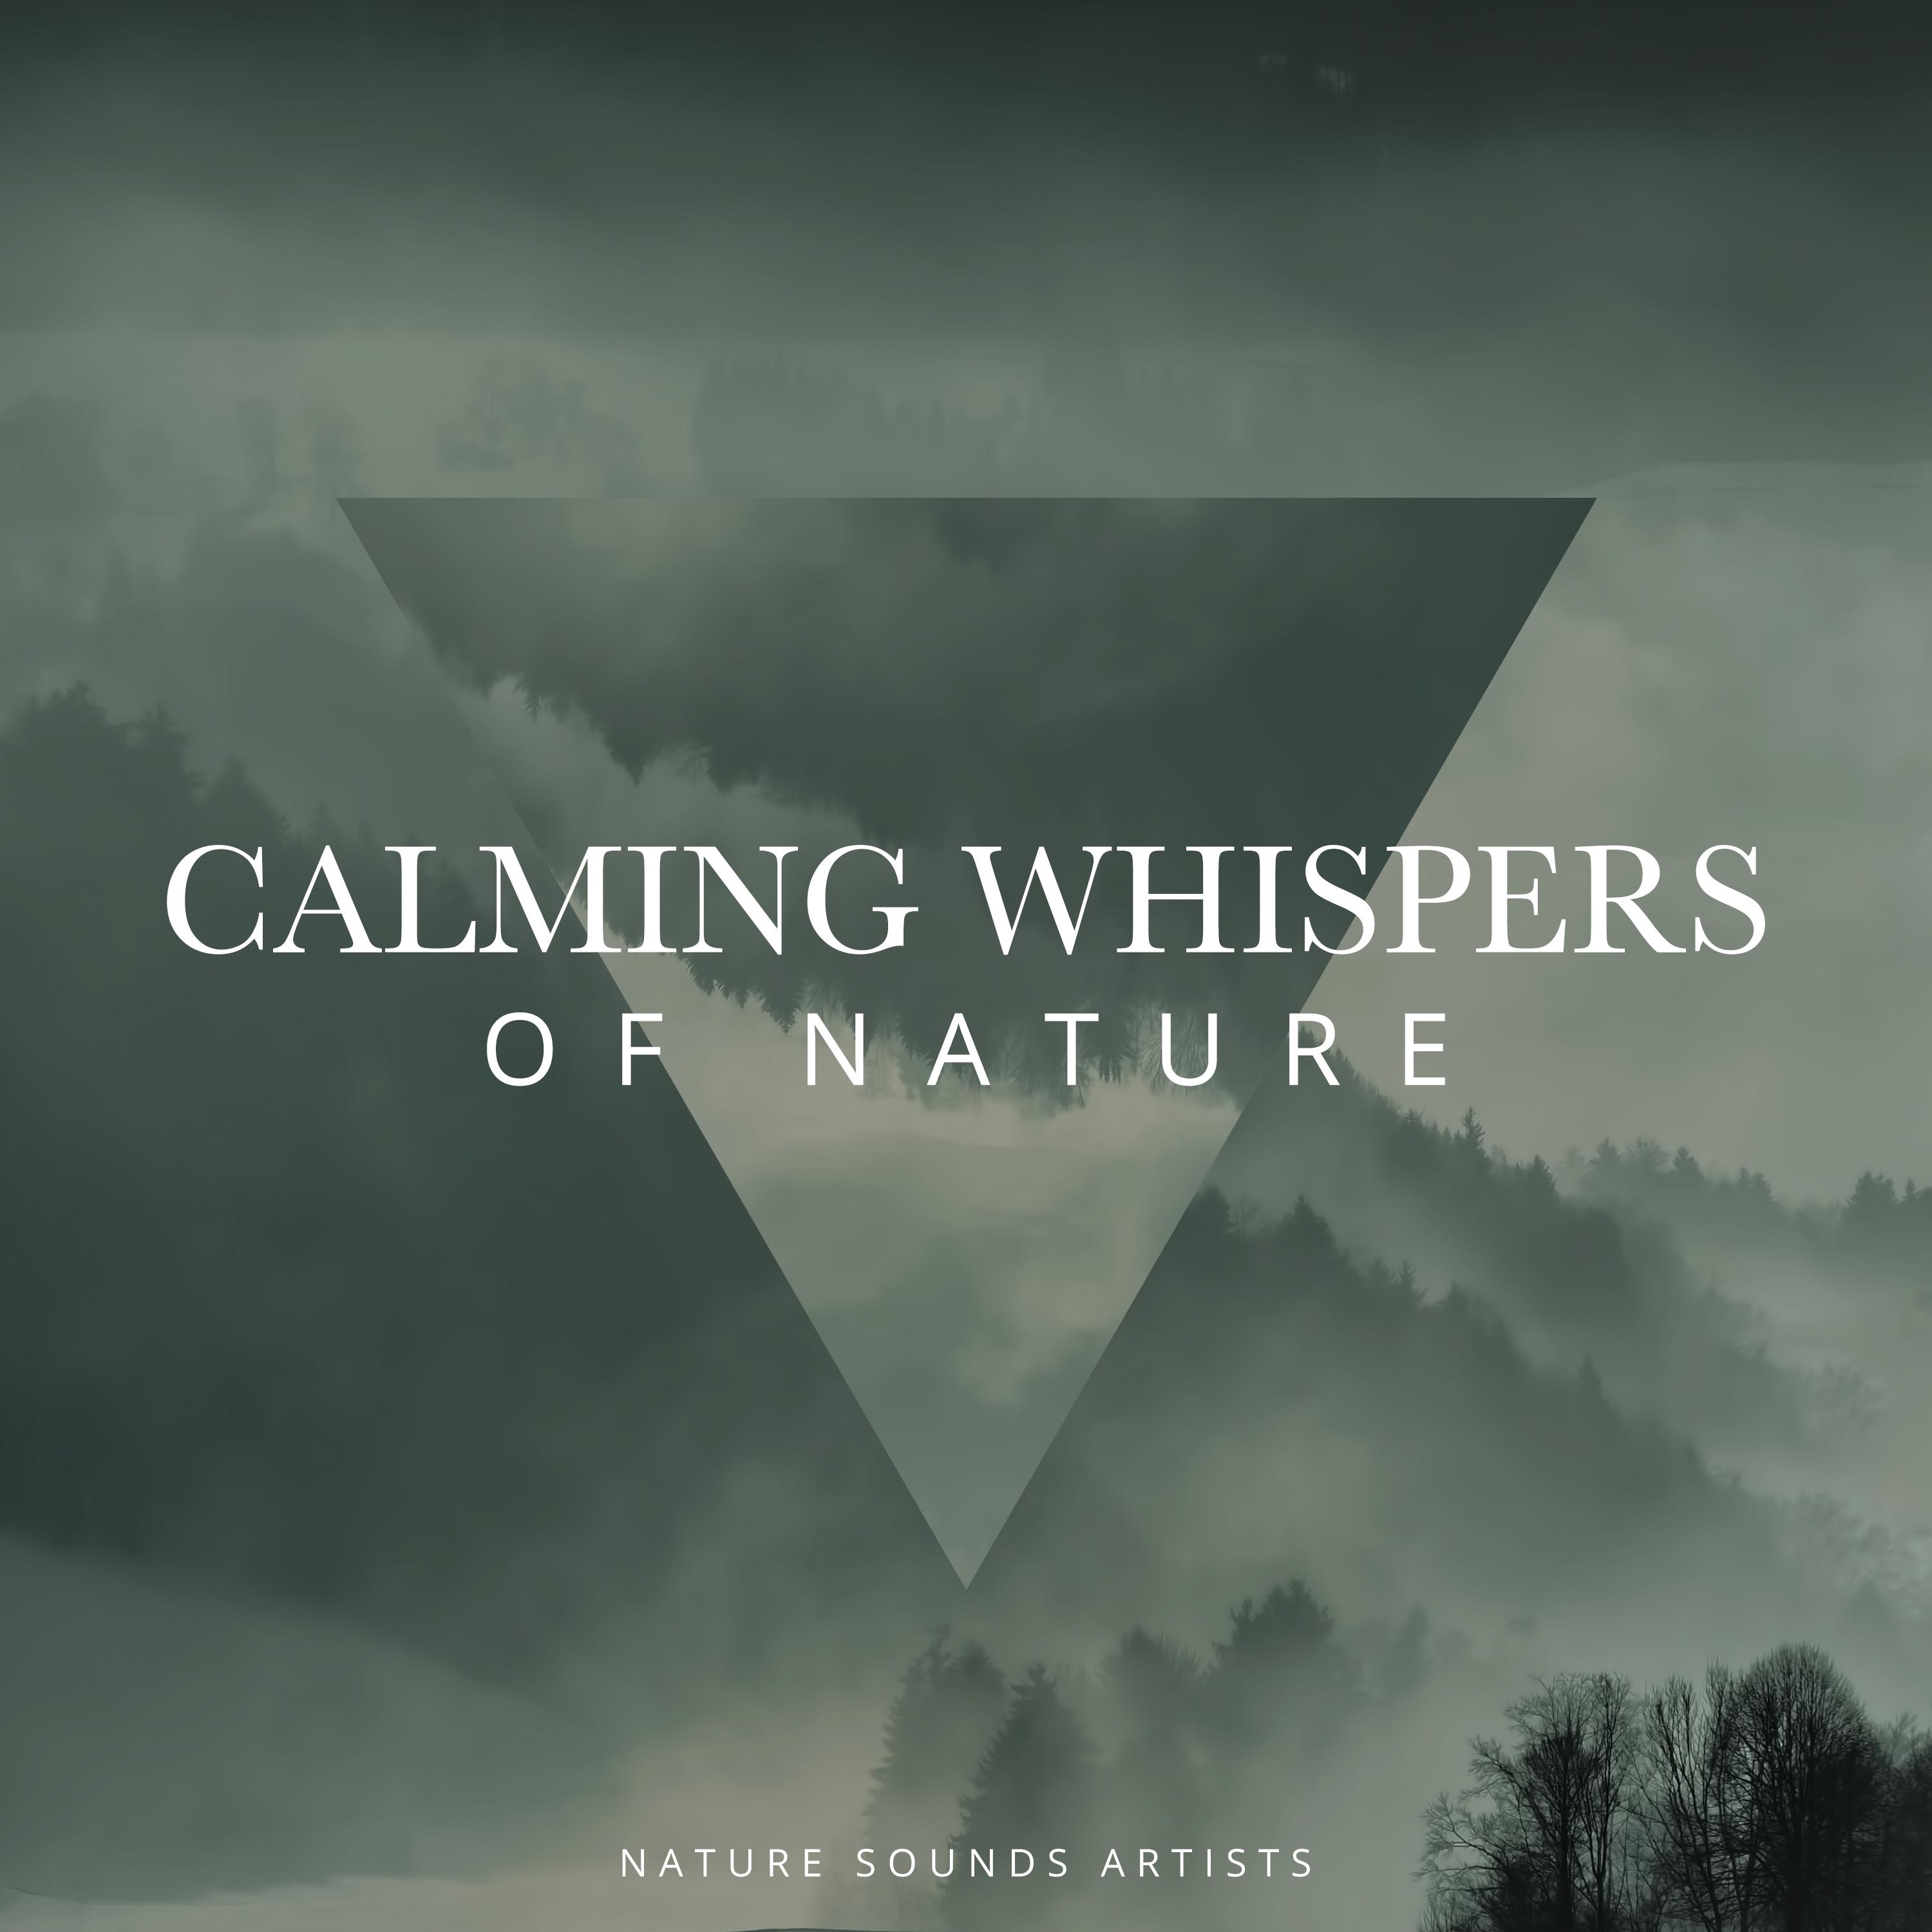 Calming Whispers of Nature